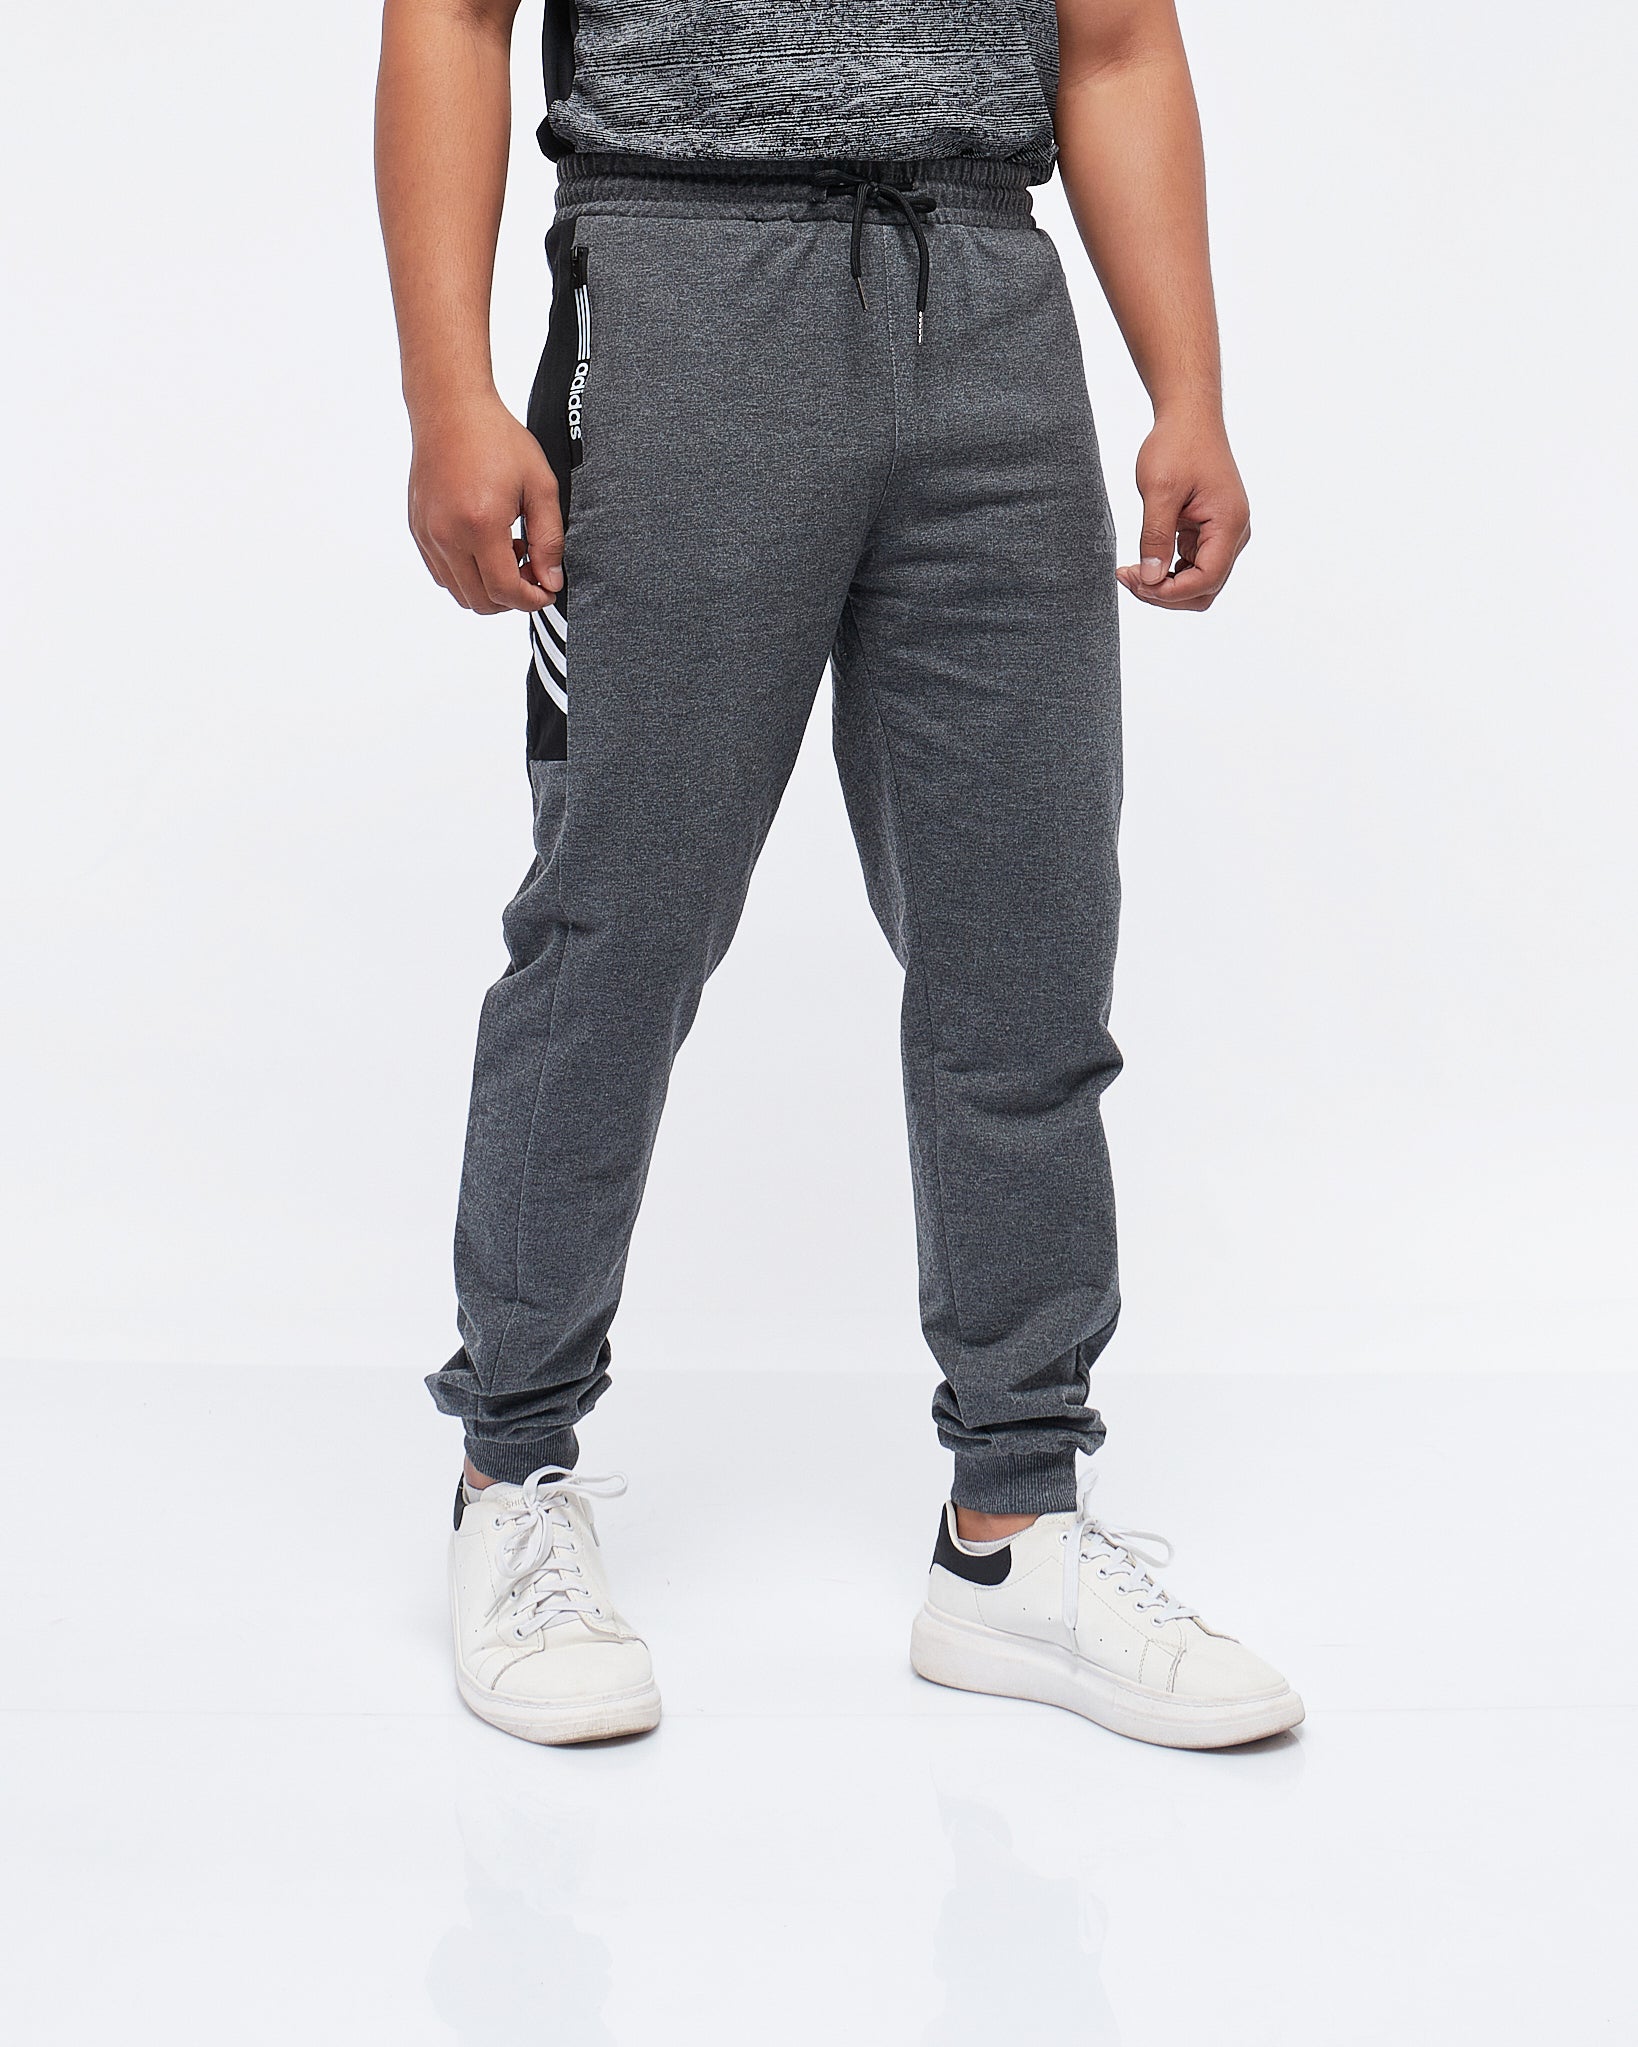 MOI OUTFIT-Half Side Striped Men Joggers 16.90